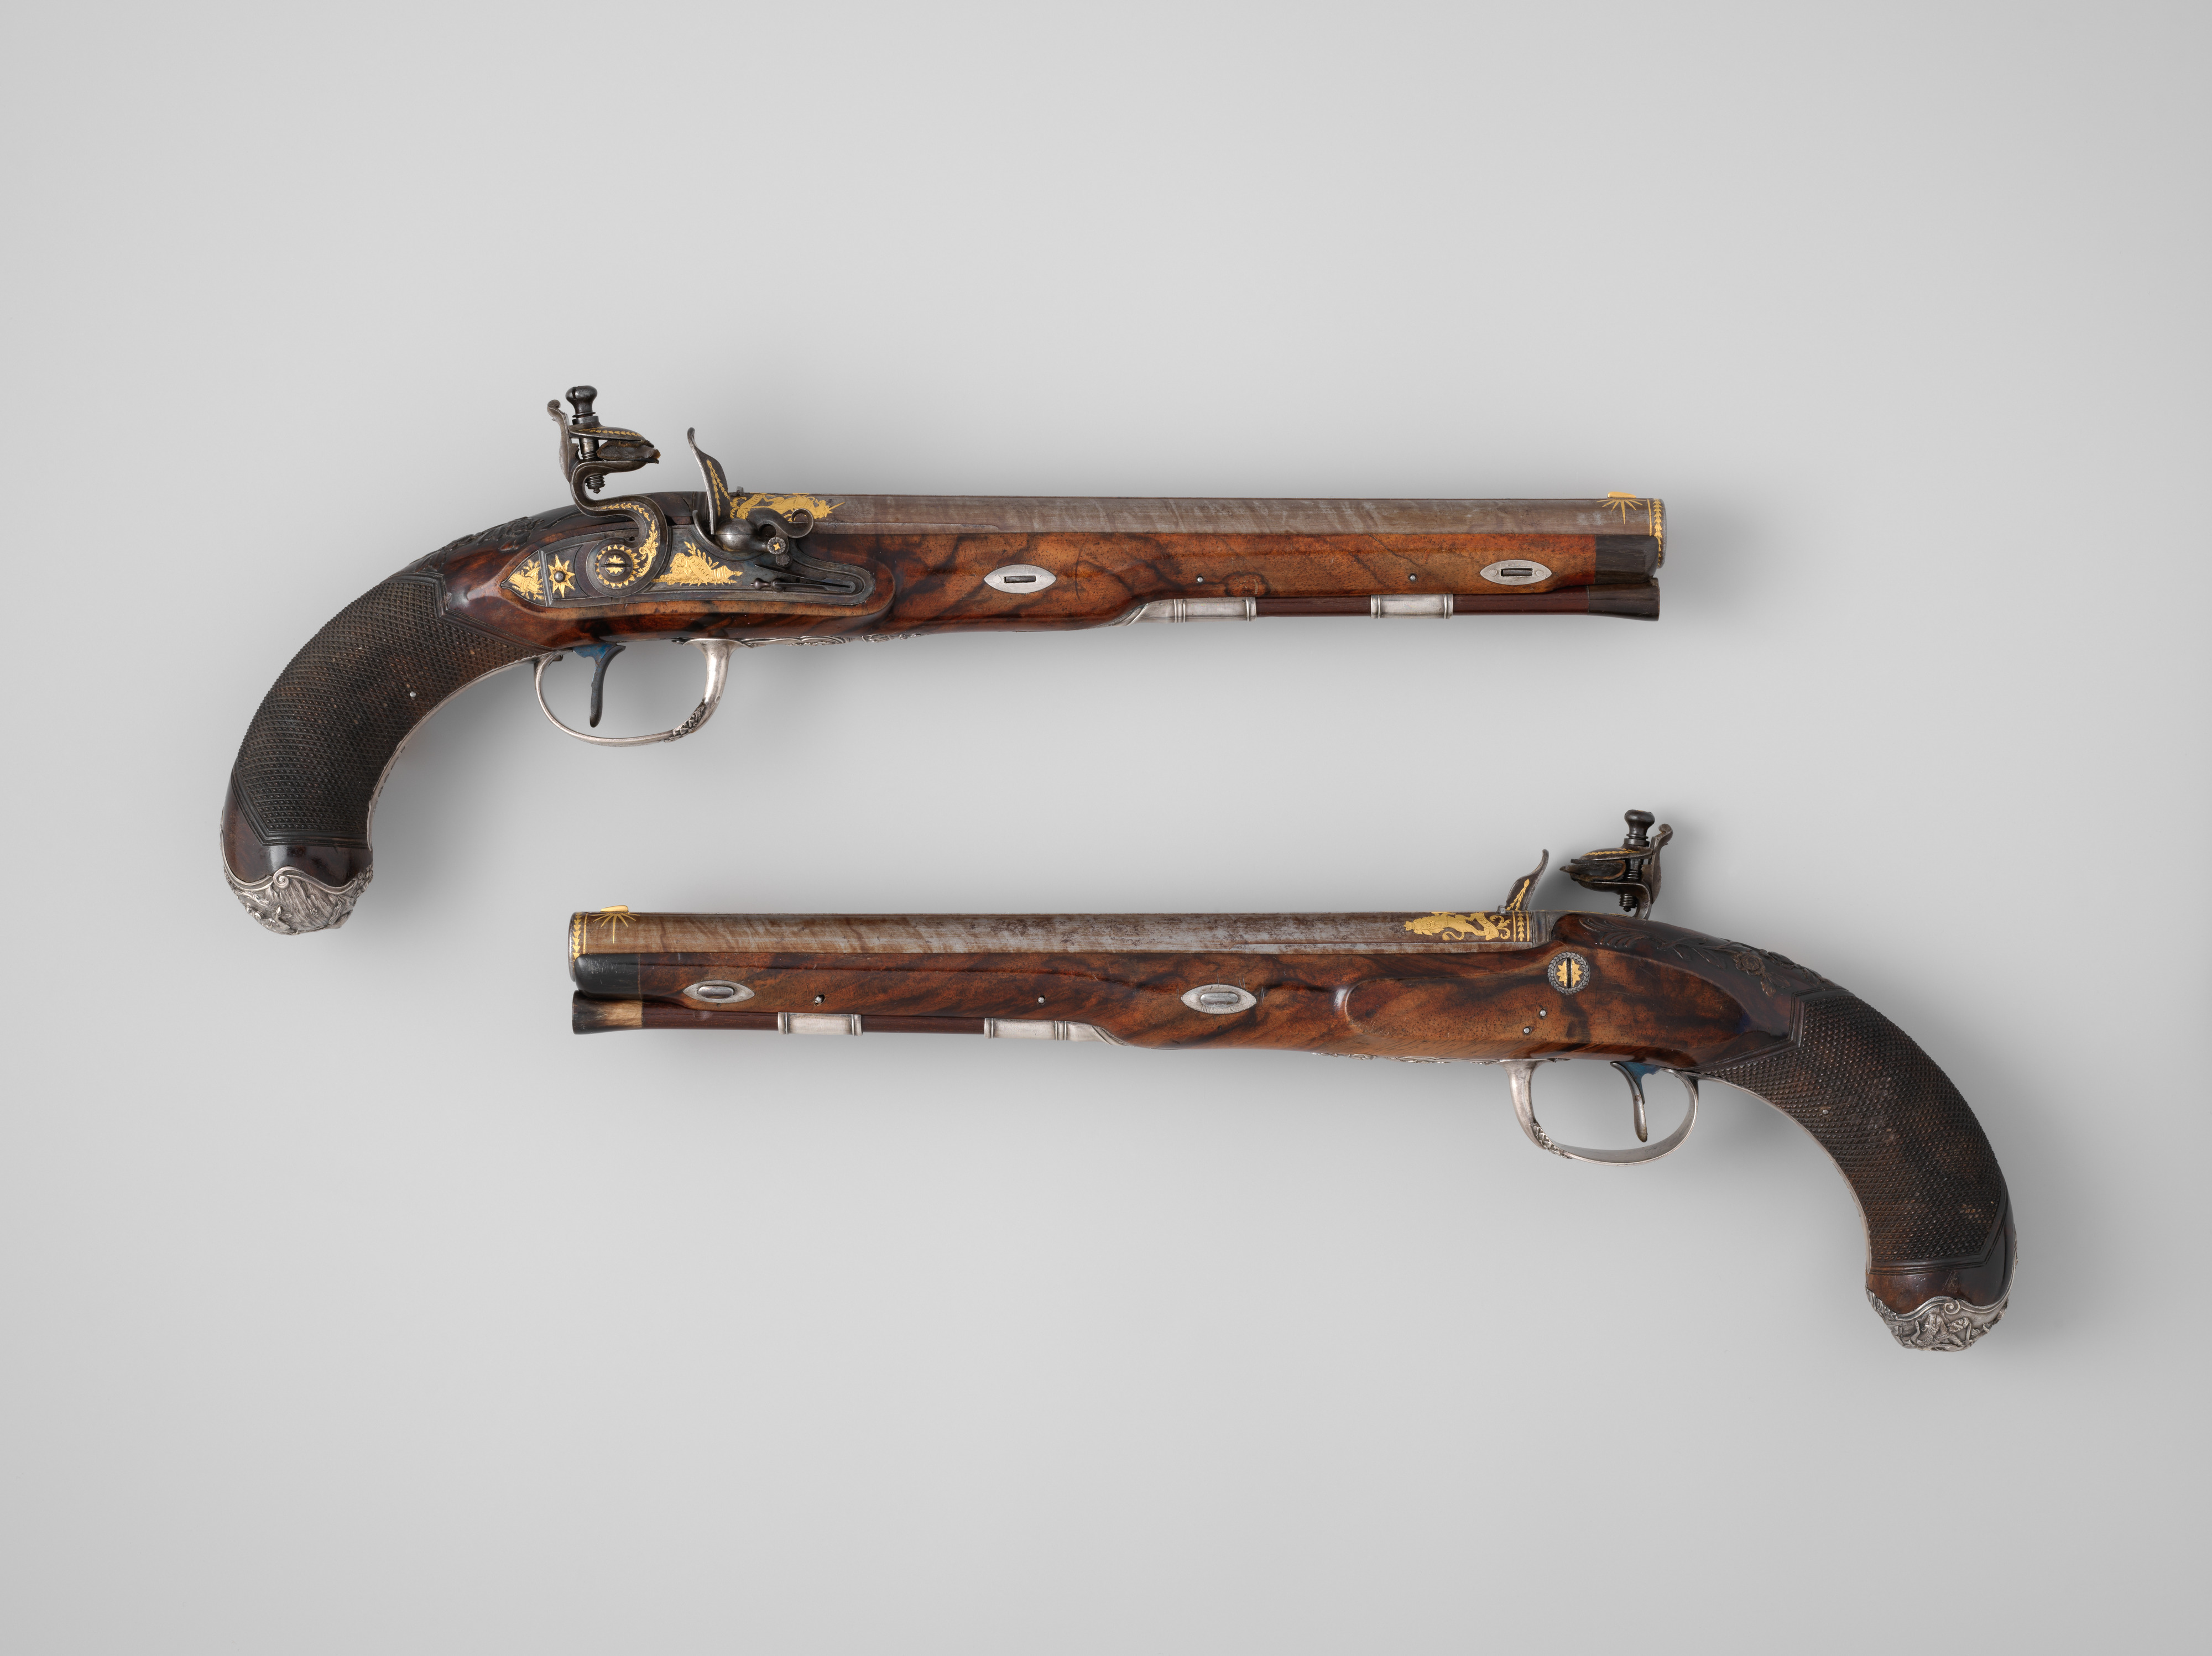 Cased Set of English Flintlock Officer's/Dueling Pistols by